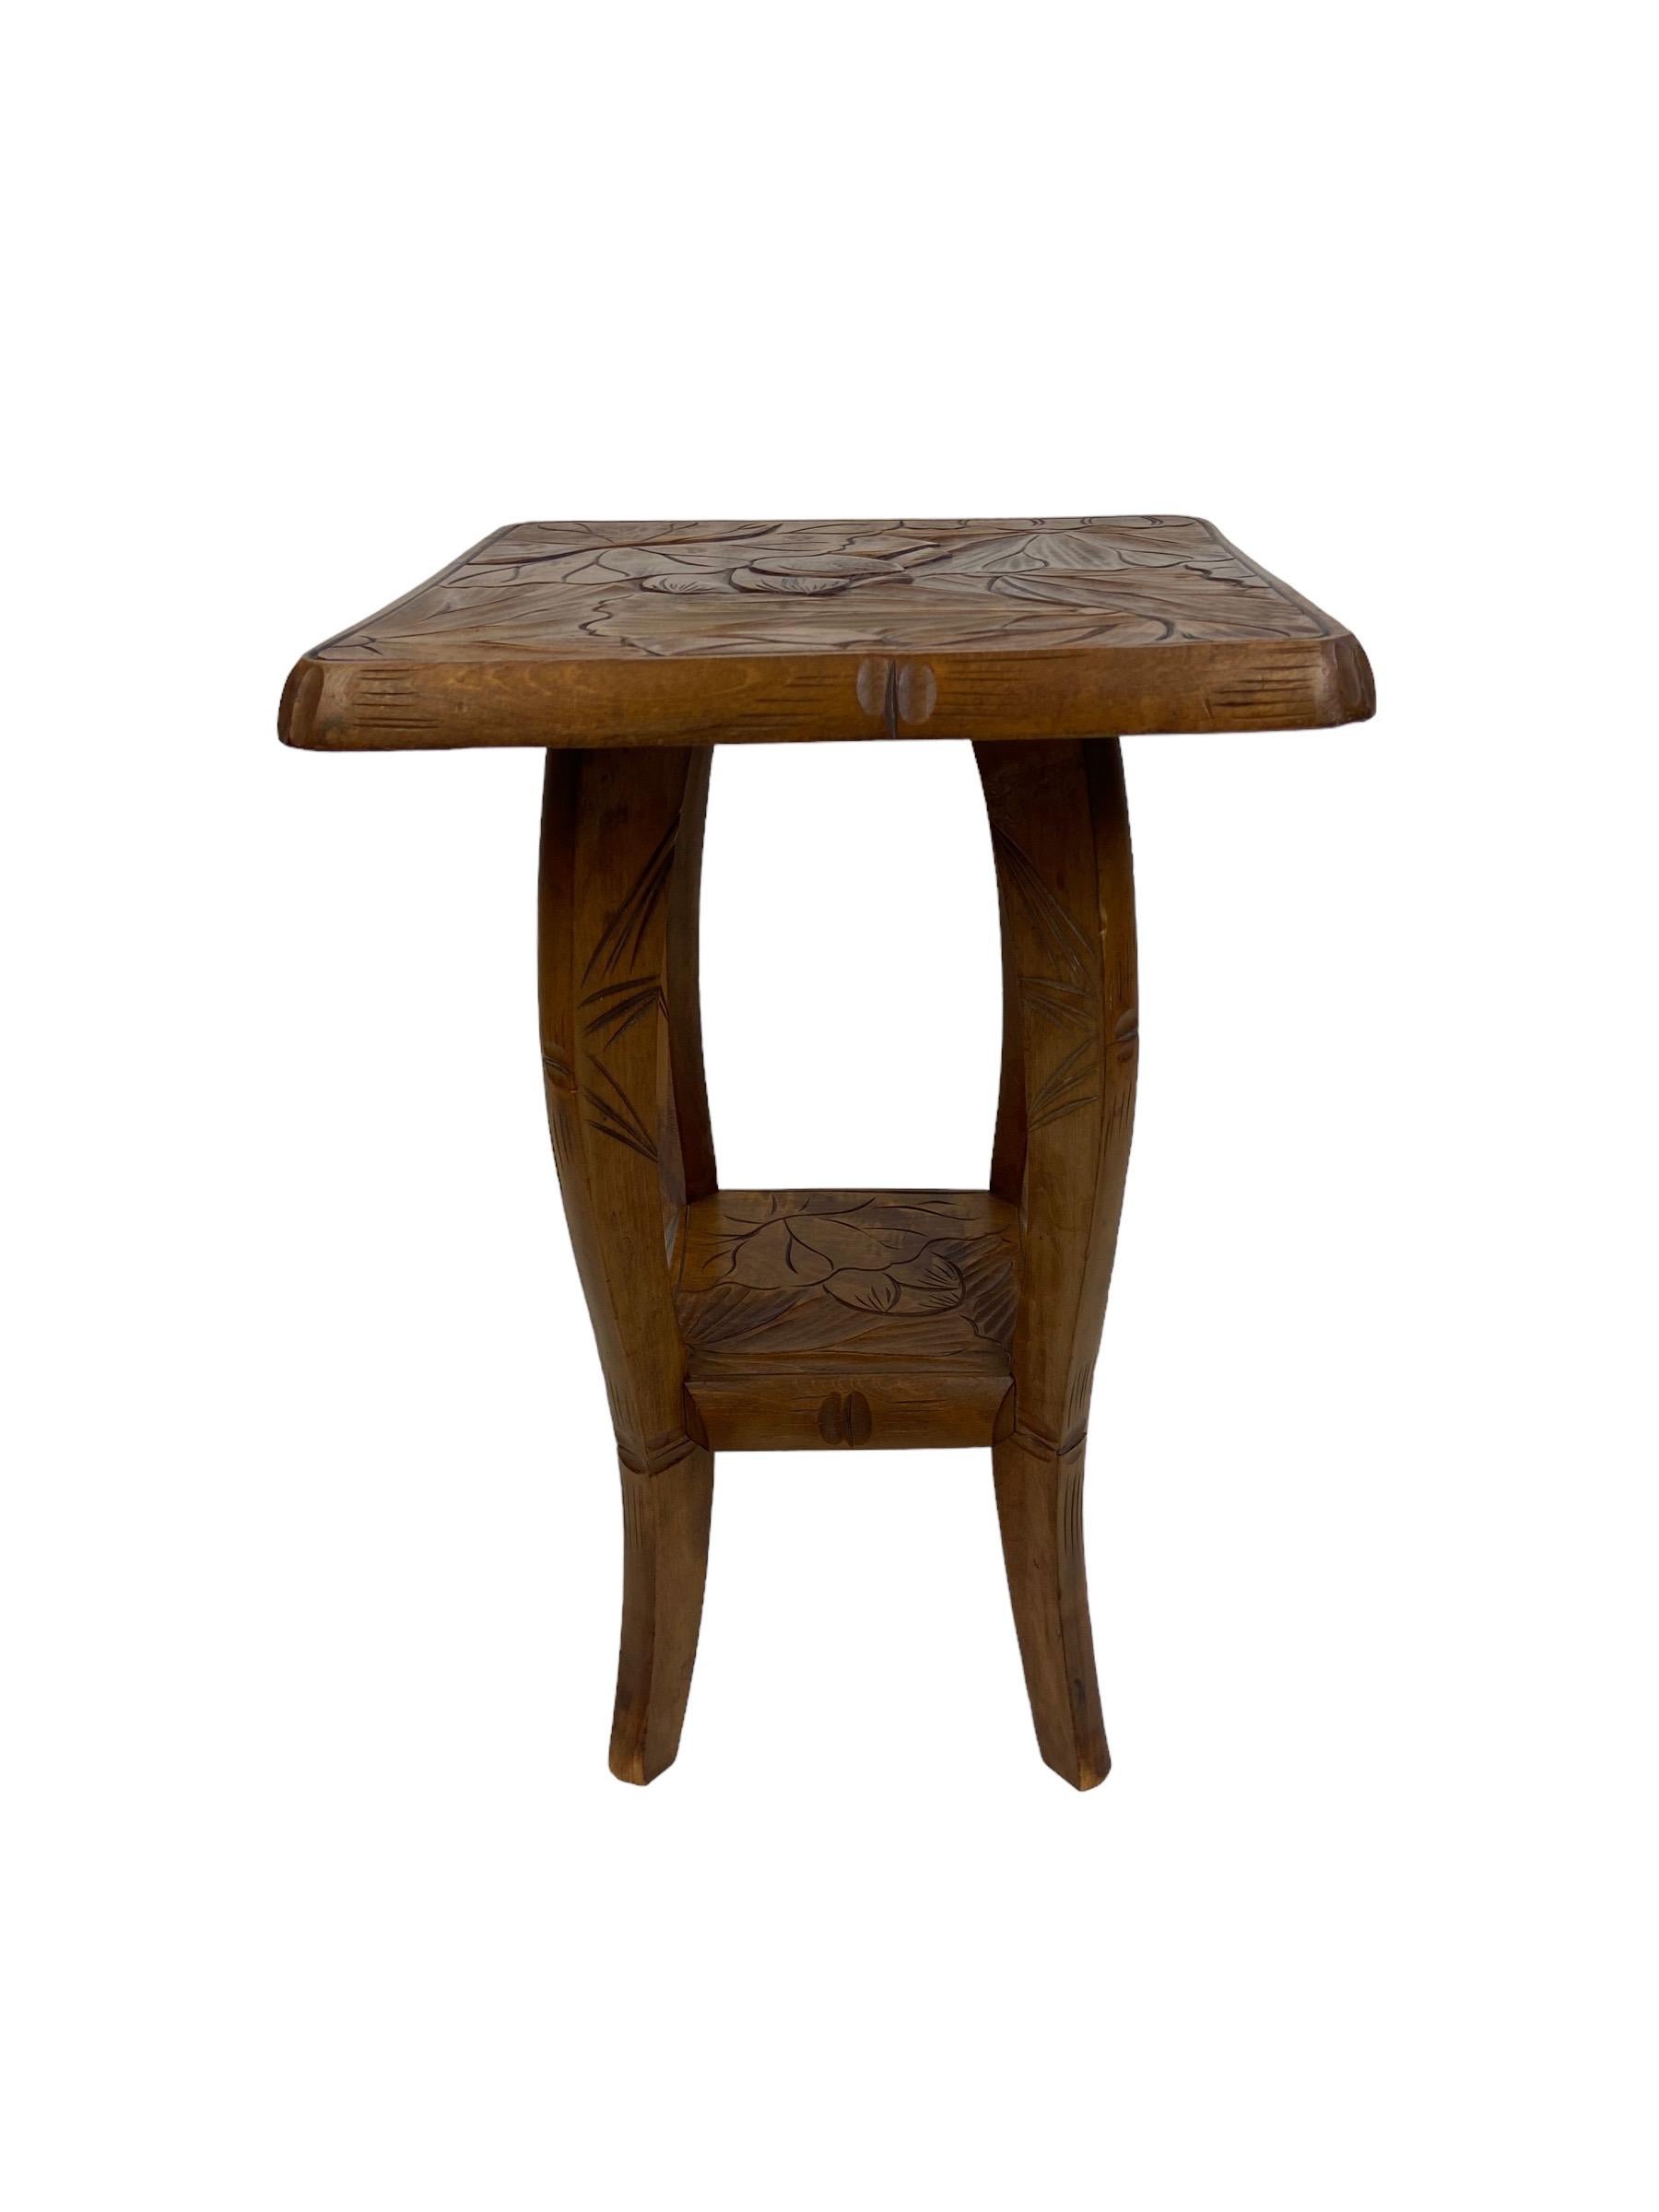 Art Deco Plant Table made and carved in Japan in the 1910s for “Liberty & Co”

height 45 cm width 30 cm depth 30 cm.